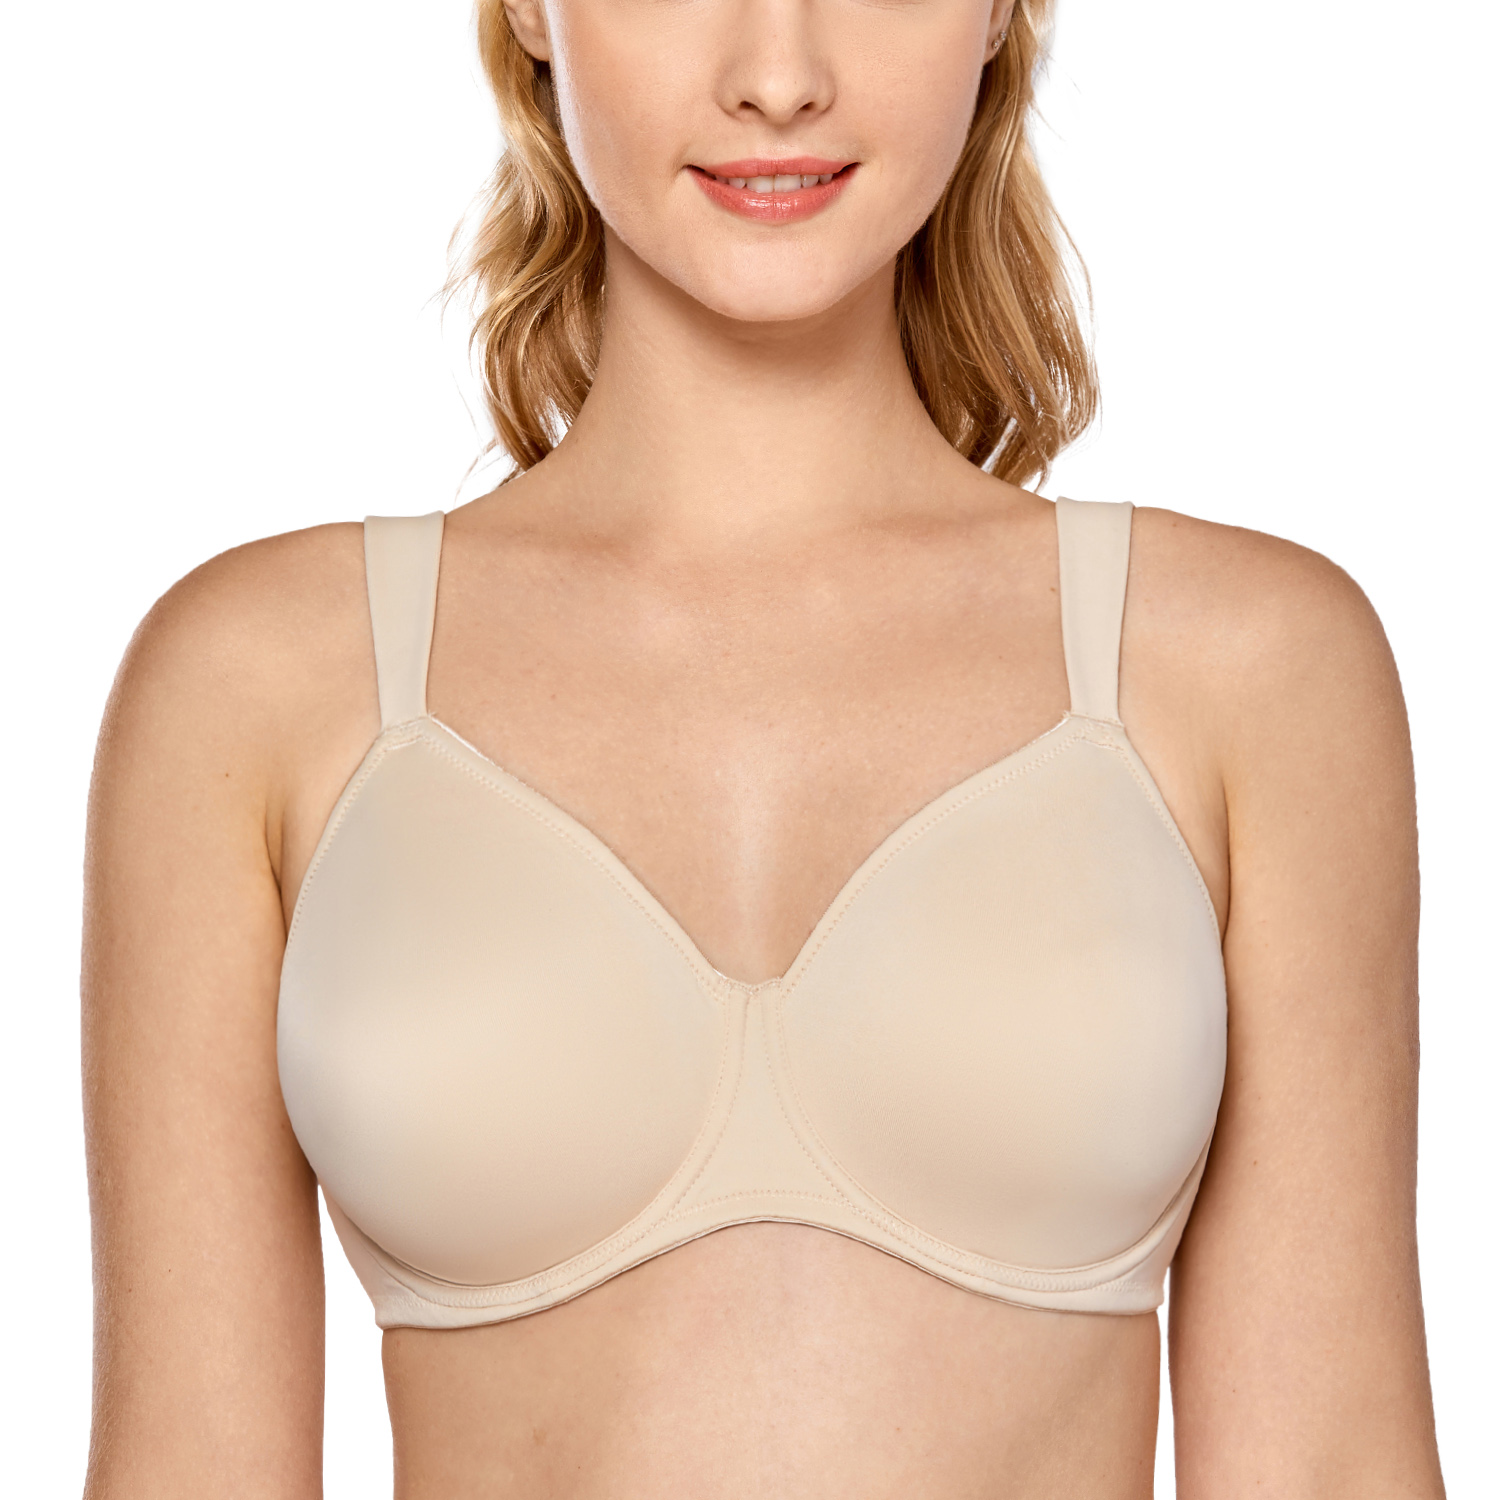 Delimira Women's Smooth Full Coverage Big Size T-Shirt Bra - Price